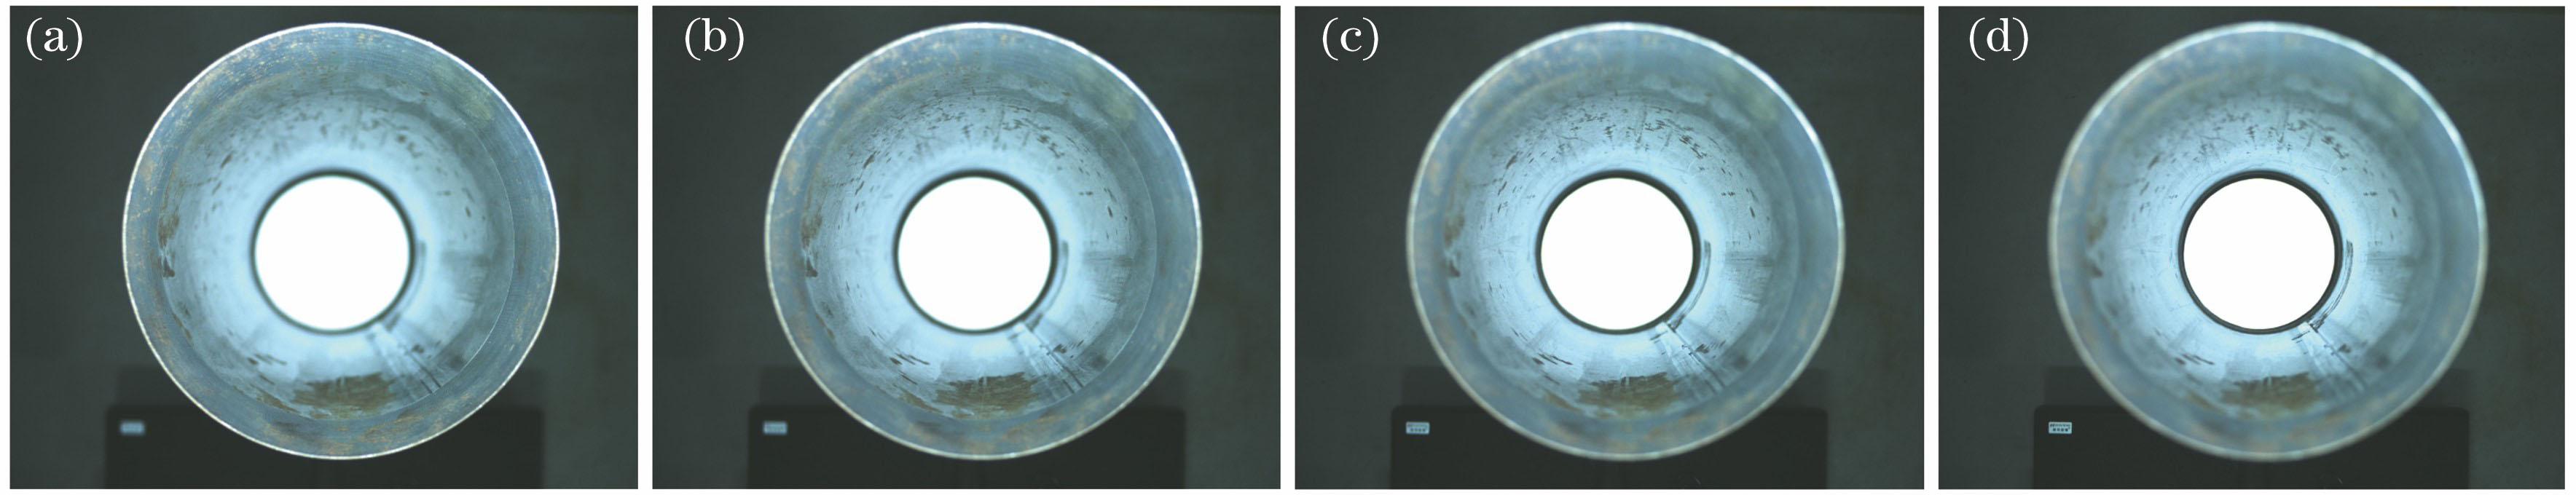 Sequence images of the inner wall of a cylindrical workpiece focused at different positions. (a) Top; (b) upper middle; (c) lower middle; (d) bottom